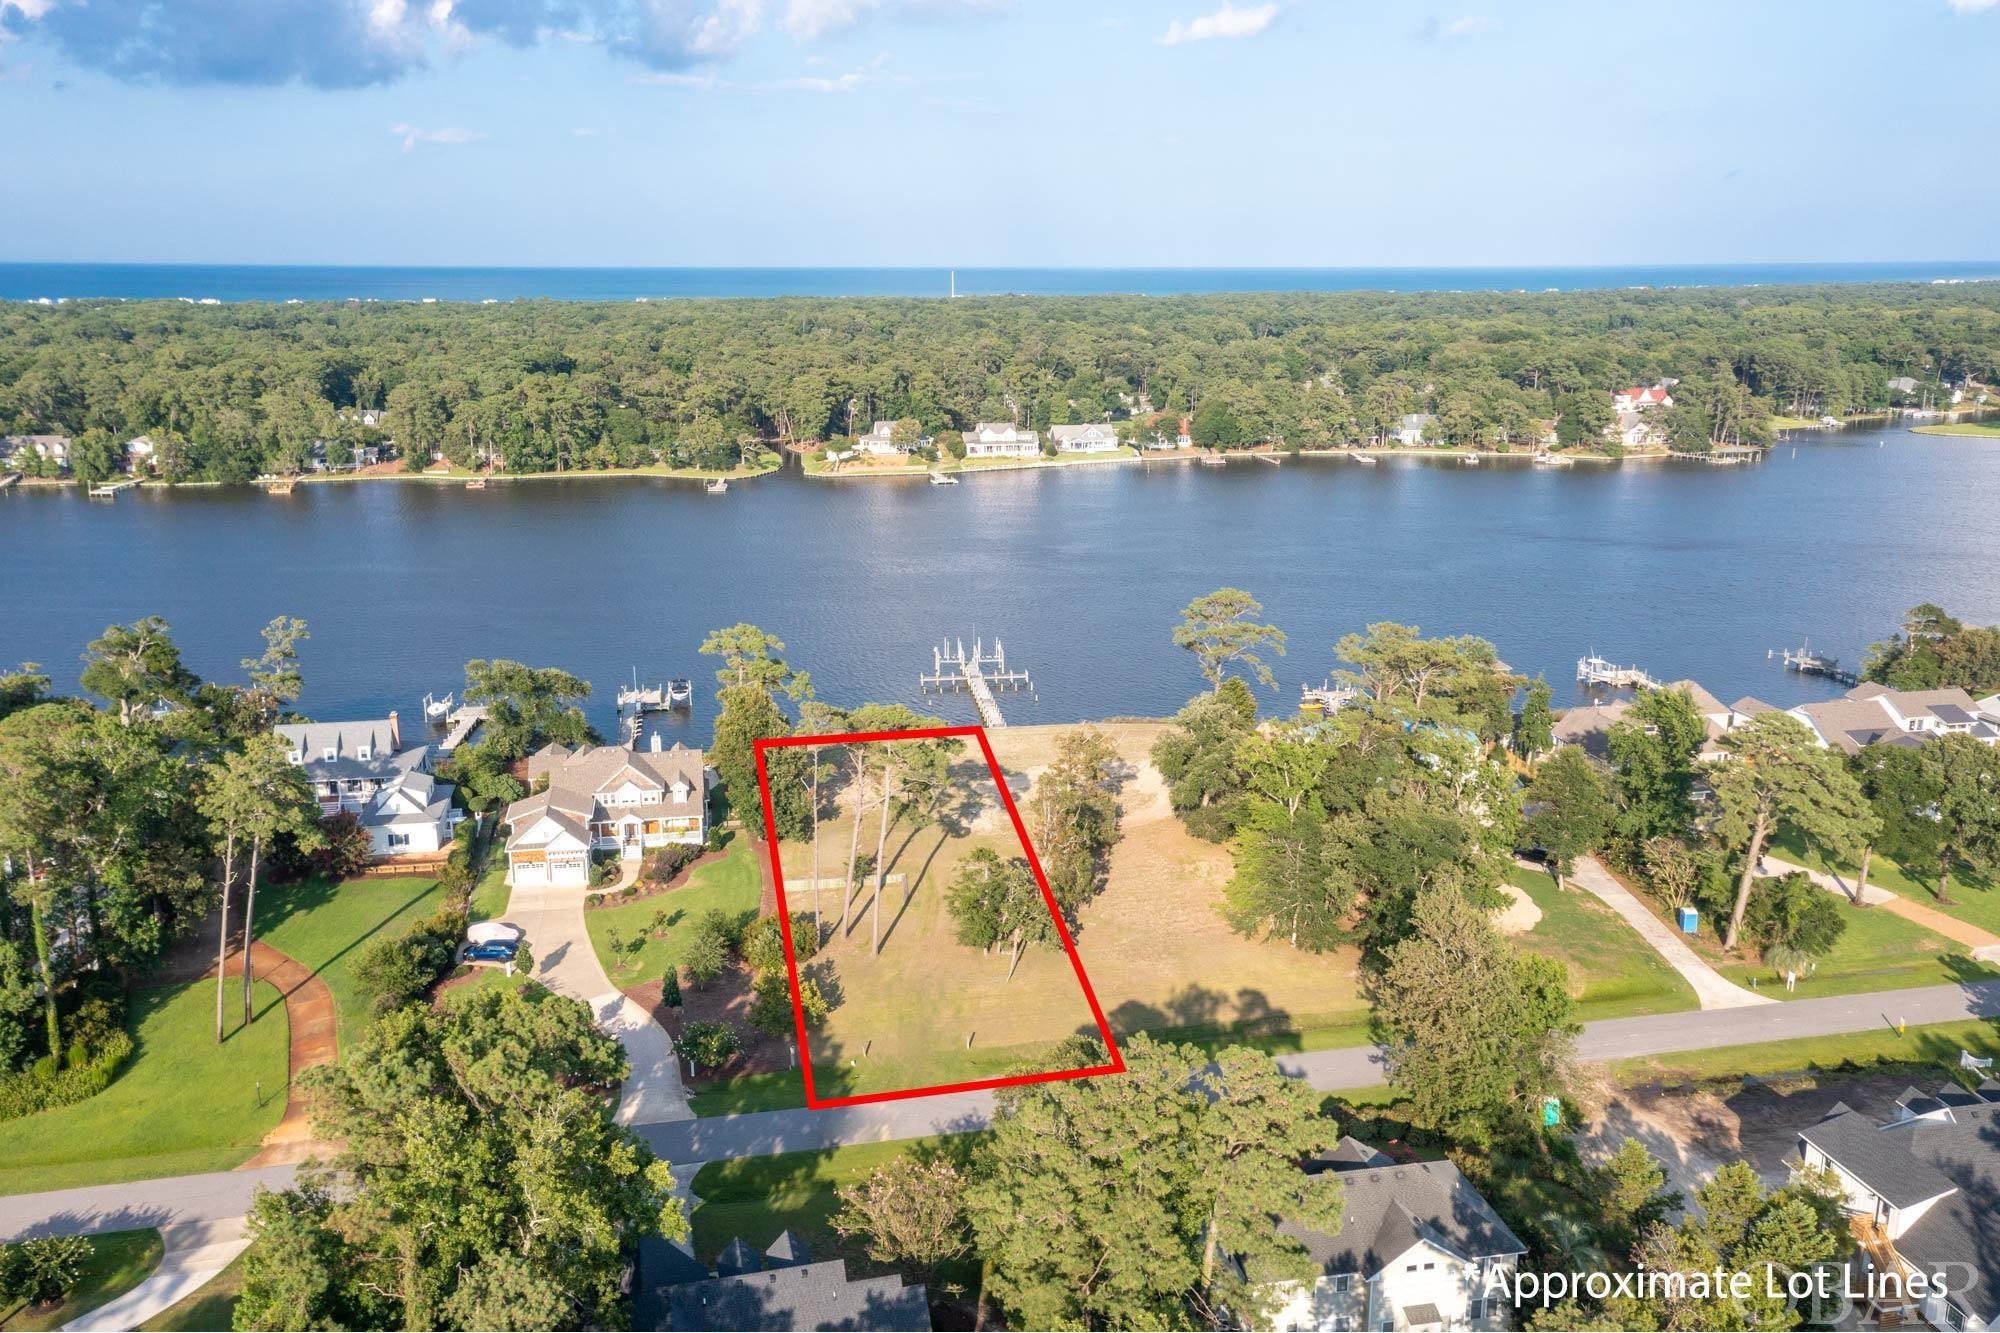 Located in the esteemed guard-gated community of Martins Point on the Outer Banks, this build-ready parcel with appx. 100 feet of water frontage sets the stage for the home of your dreams. Offering breathtaking vistas that stretch across the Jean Guite Creek, this approximately 30,000 square foot lot is one of the last available vacant lands in this peninsula community.  The heavy duty, double reinforced vinyl bulkhead has been constructed with the best craftsmanship and materials available.  The ground elevation is estimated to be 10’, and the property is cleared and maintained.  Residents of Martins Point can take advantage of the superb amenities including a marina, boat ramp and dock, park, and 24-hour guard security.  Presenting an unrivaled lifestyle and location near the miles of Outer Banks beaches, this offering is not one to be missed. The adjoining lot is also available – see MLS 119787.